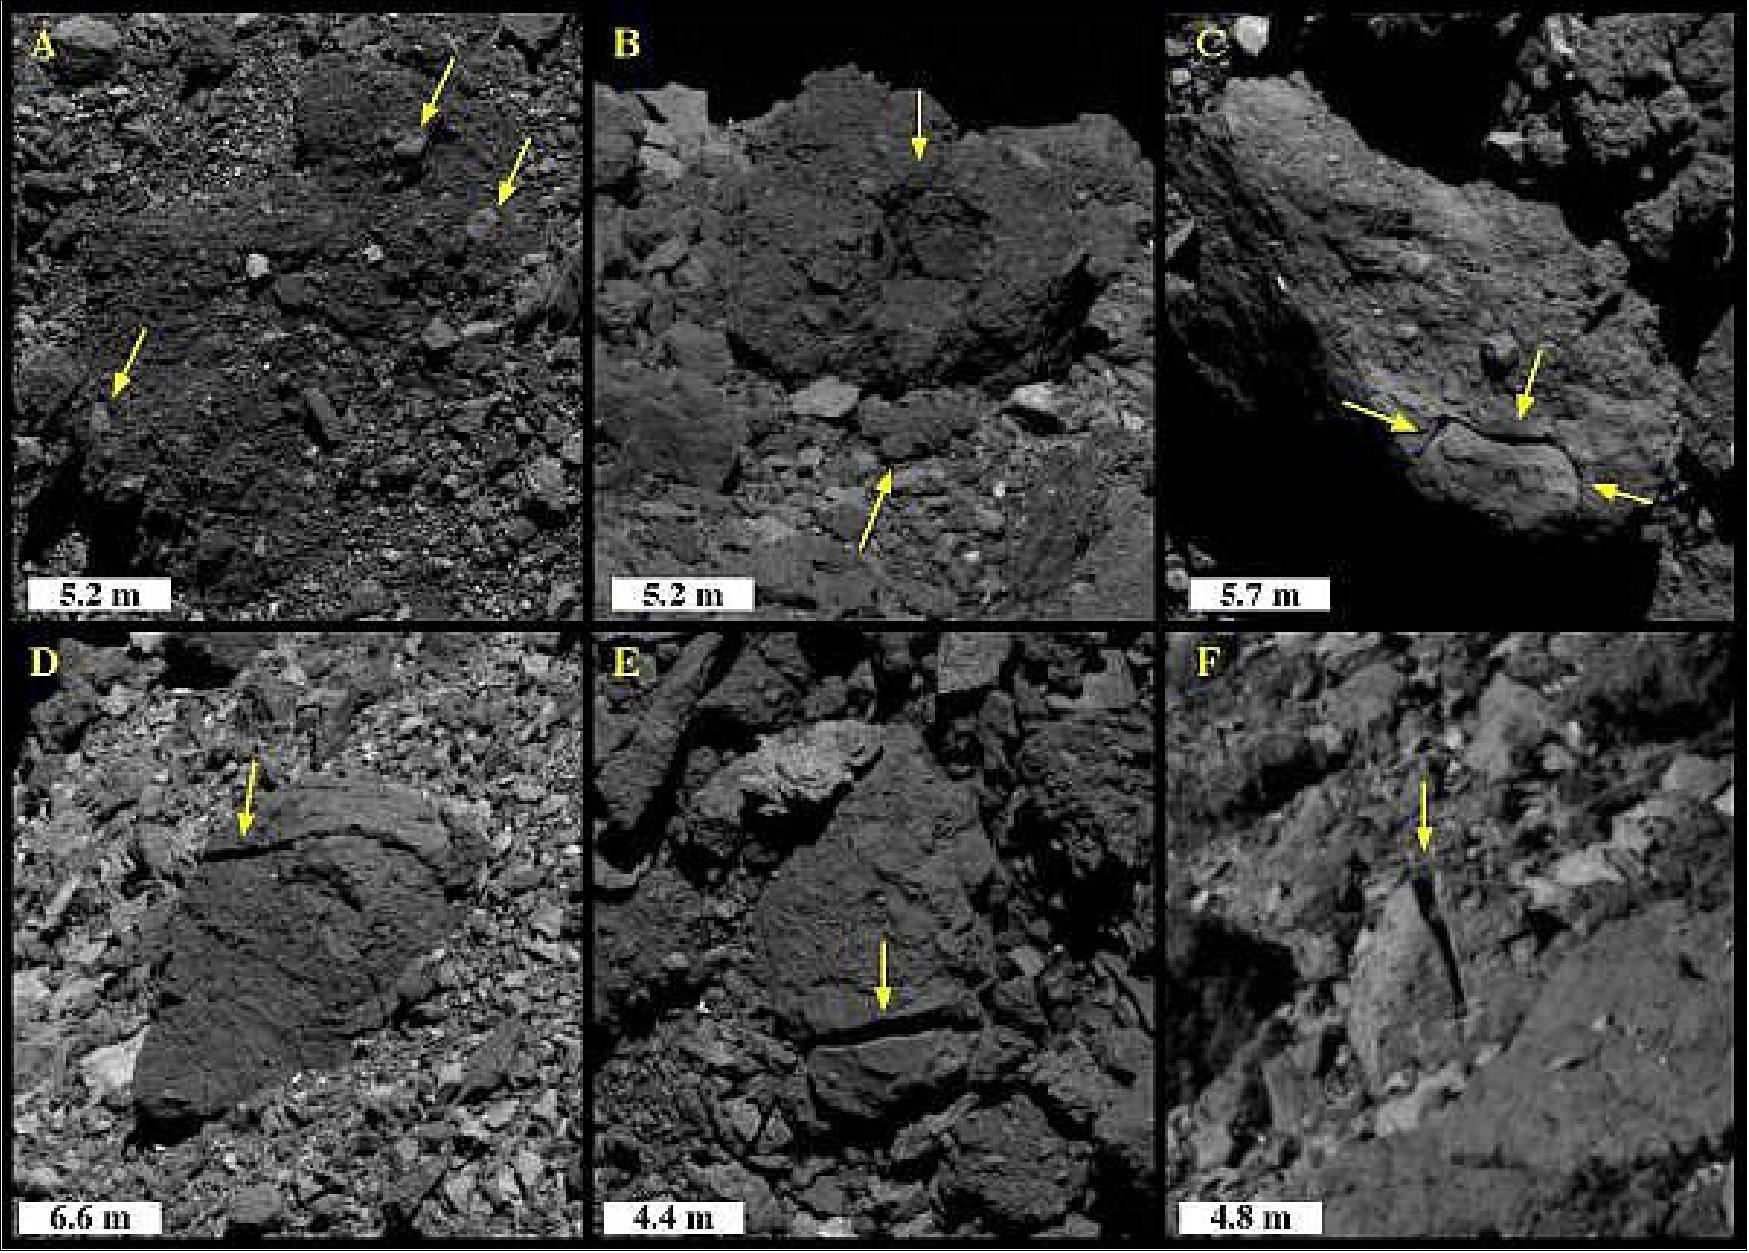 Figure 34: Examples of disaggregation (top) and linear fractures (bottom) in boulders of varying sizes on Bennu (image credit: NASA/Goddard/University of Arizona)